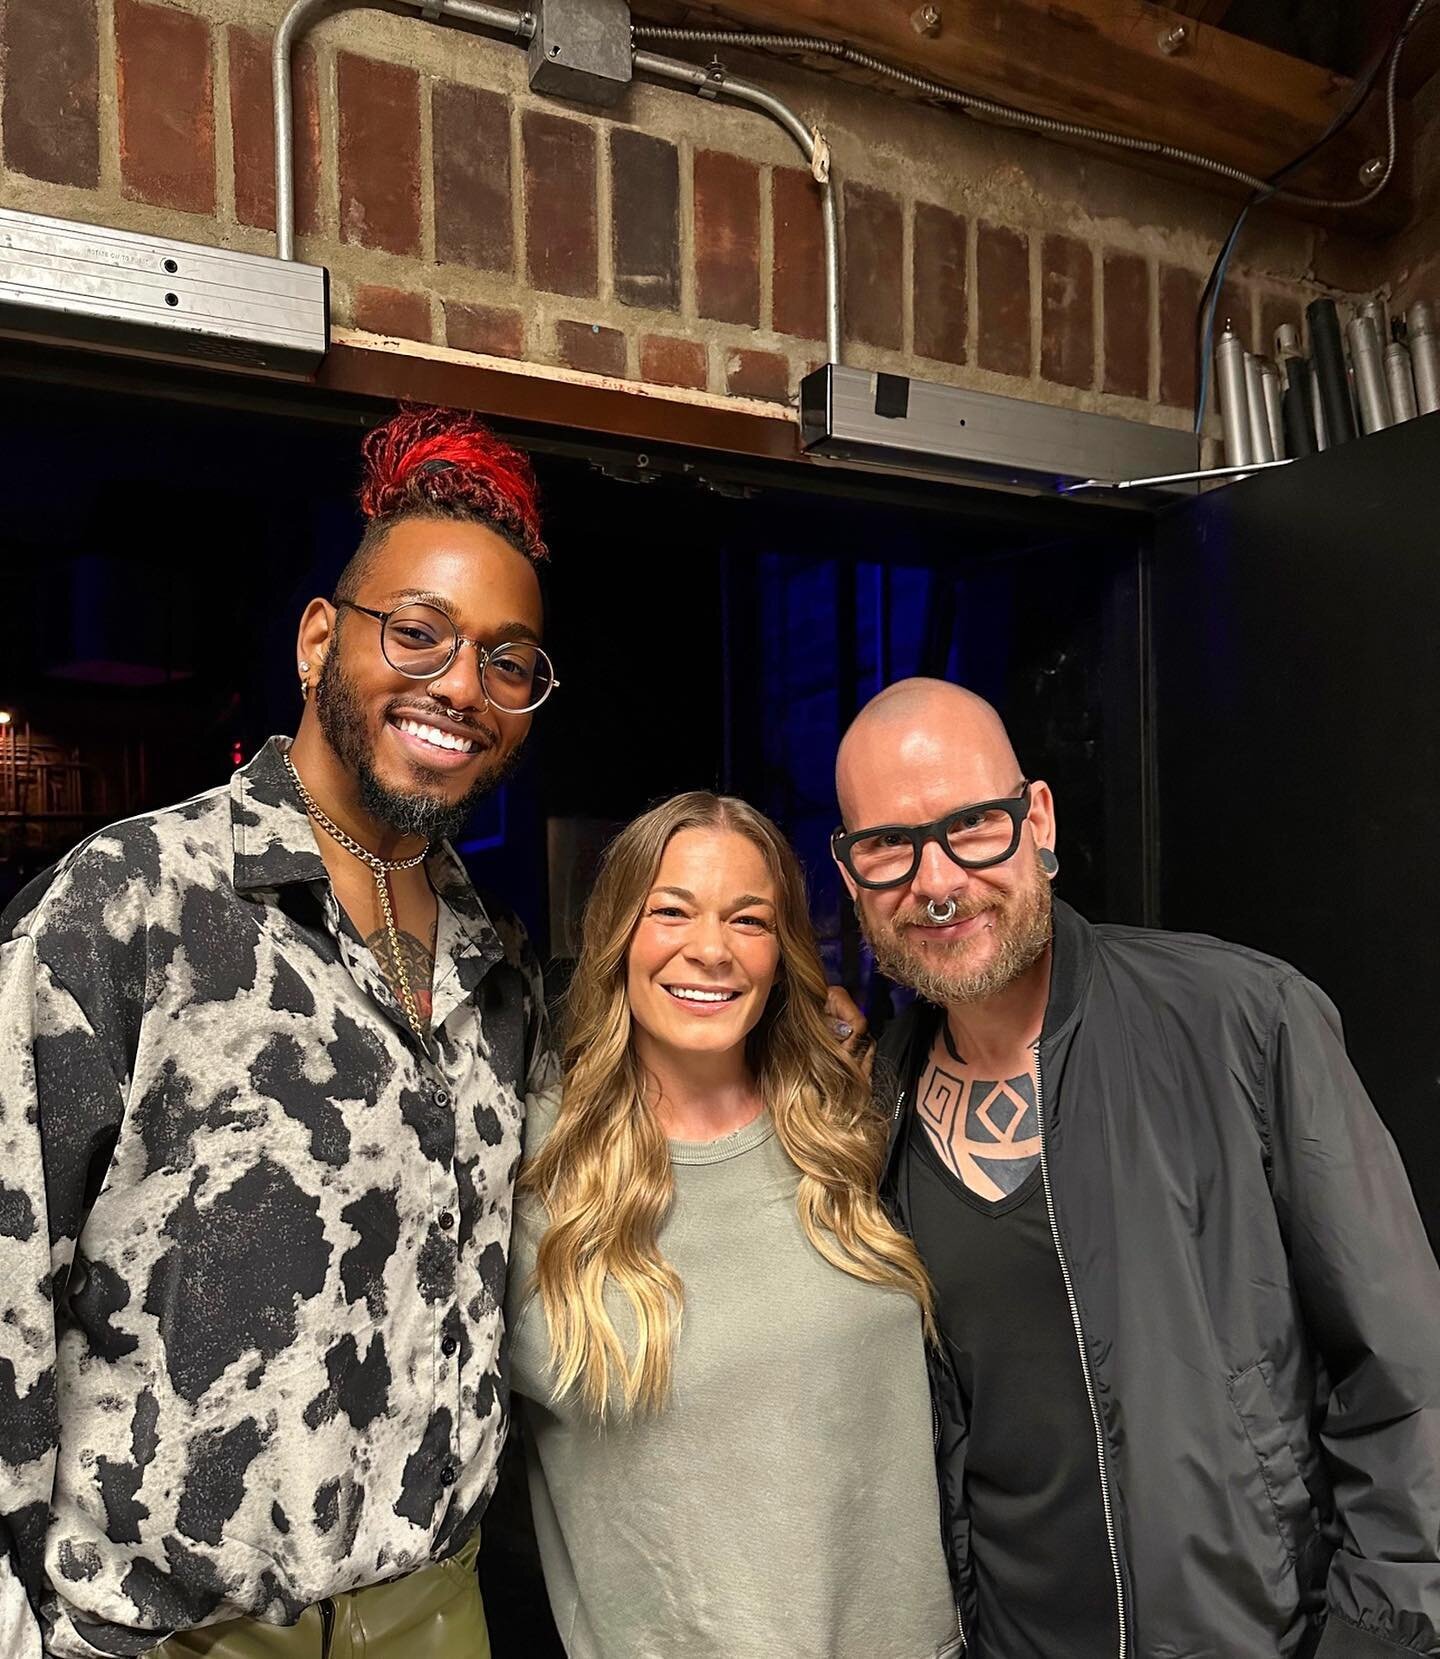 My darling @leannrimes tonight was absolutely fabulous. Your voice, as I&rsquo;ve always said, is a masterclass every single time it opens. Your talent defies human explanation &amp; understanding. Your spirit&hellip;well the same can be said here. 
